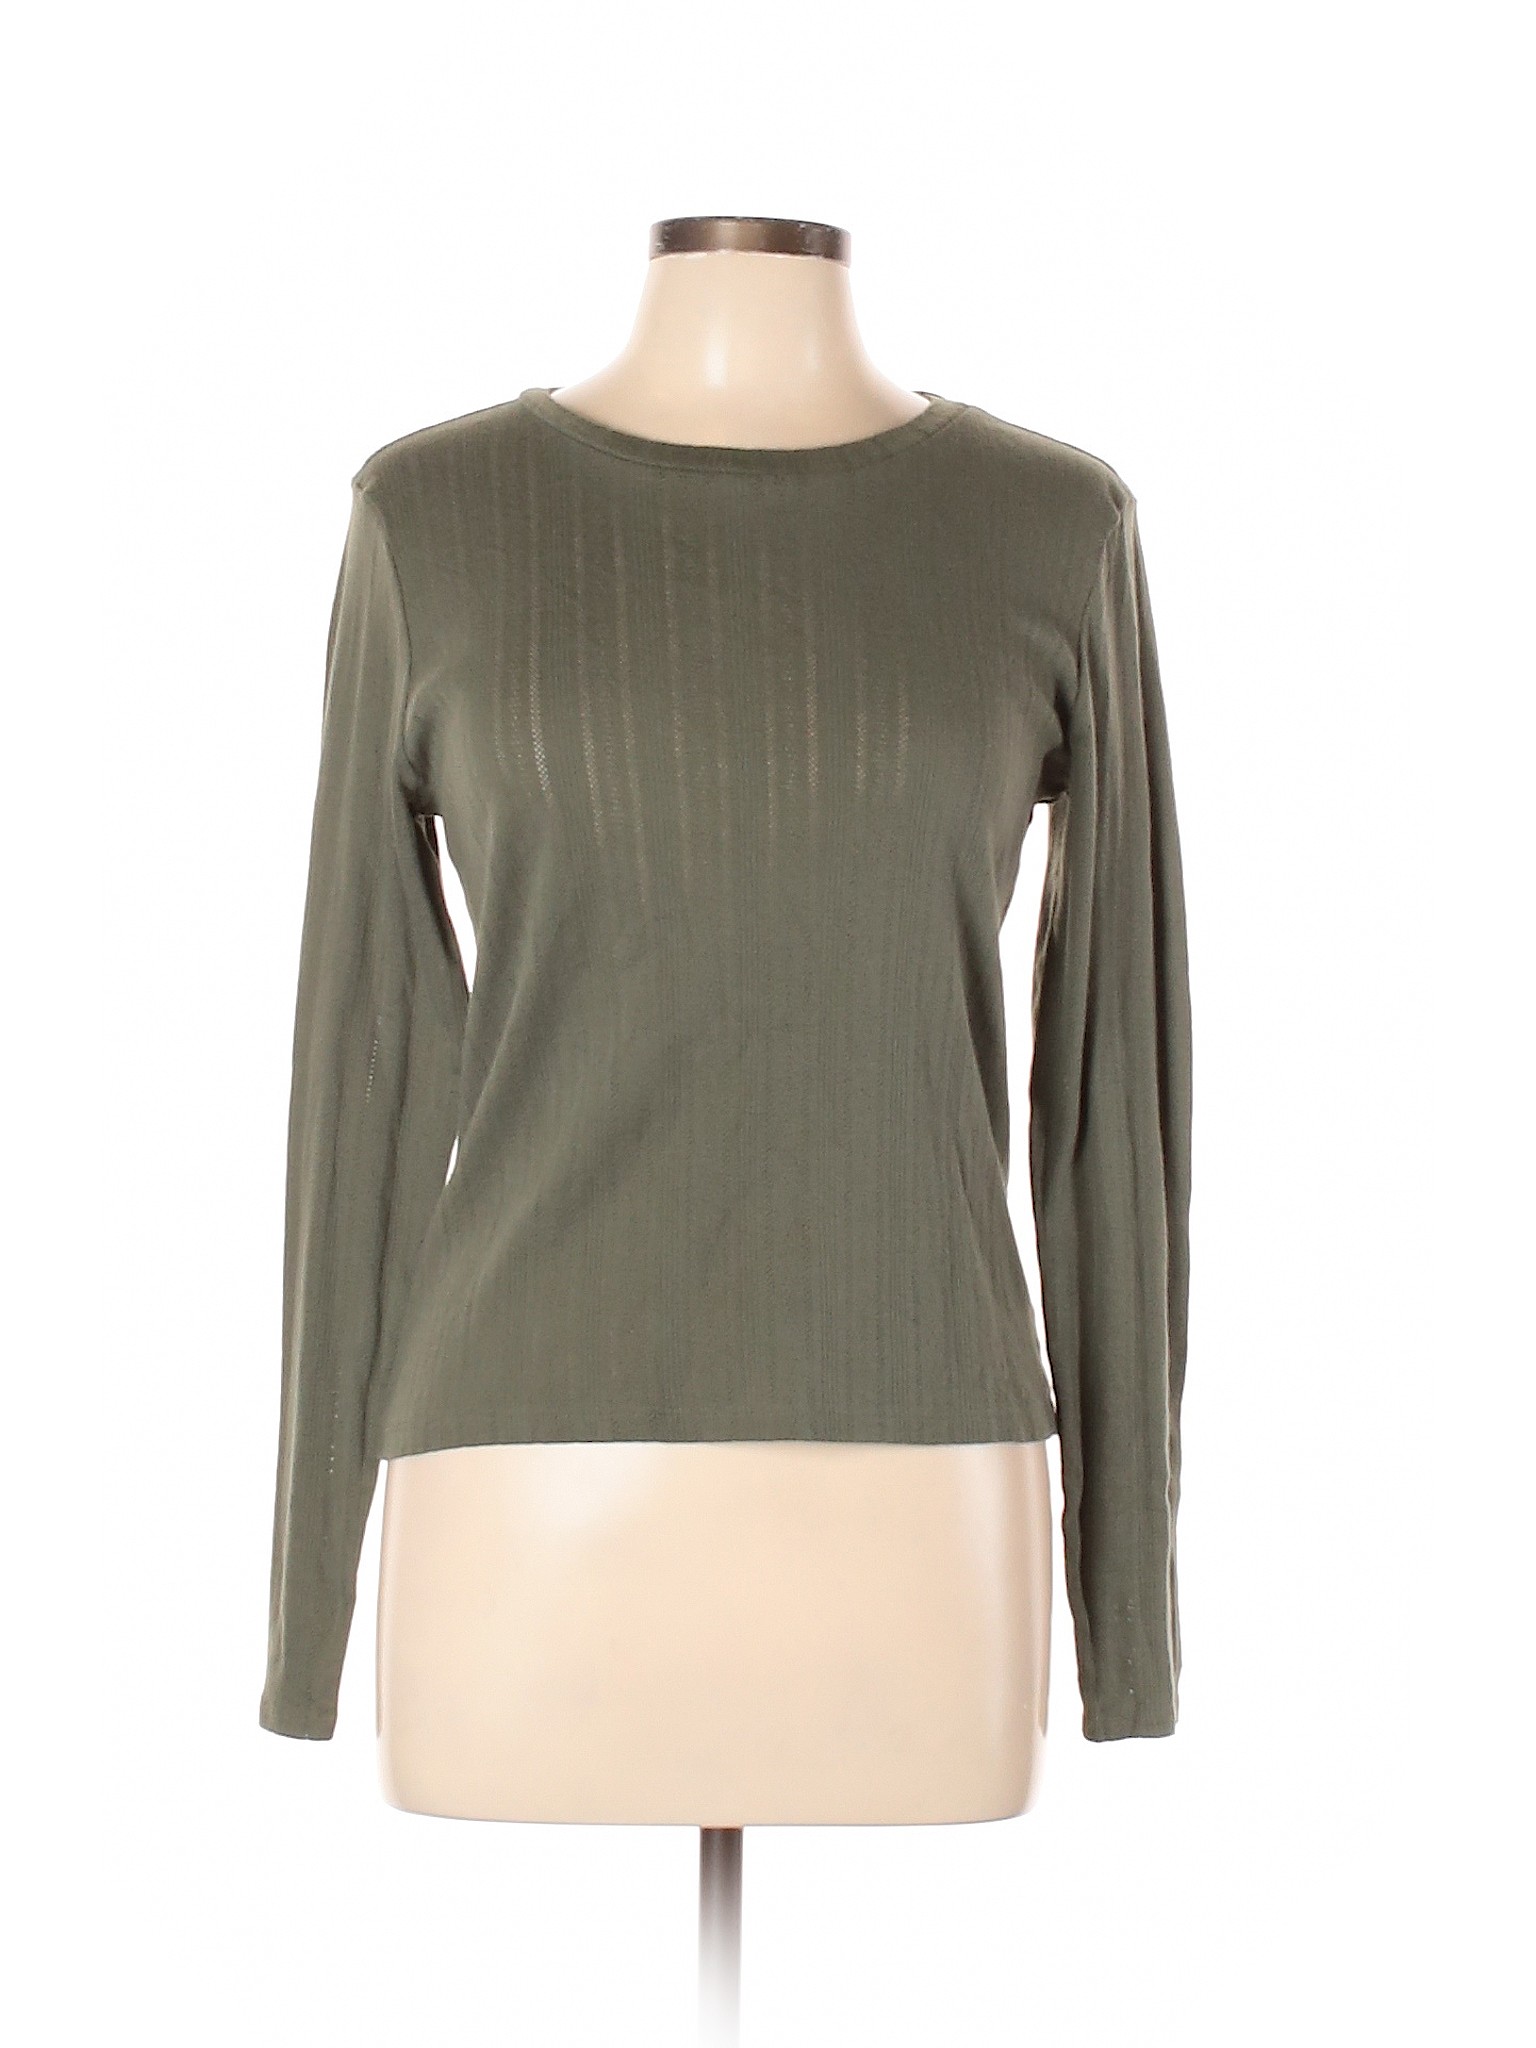 American Eagle Outfitters Women Green Long Sleeve Top L | eBay